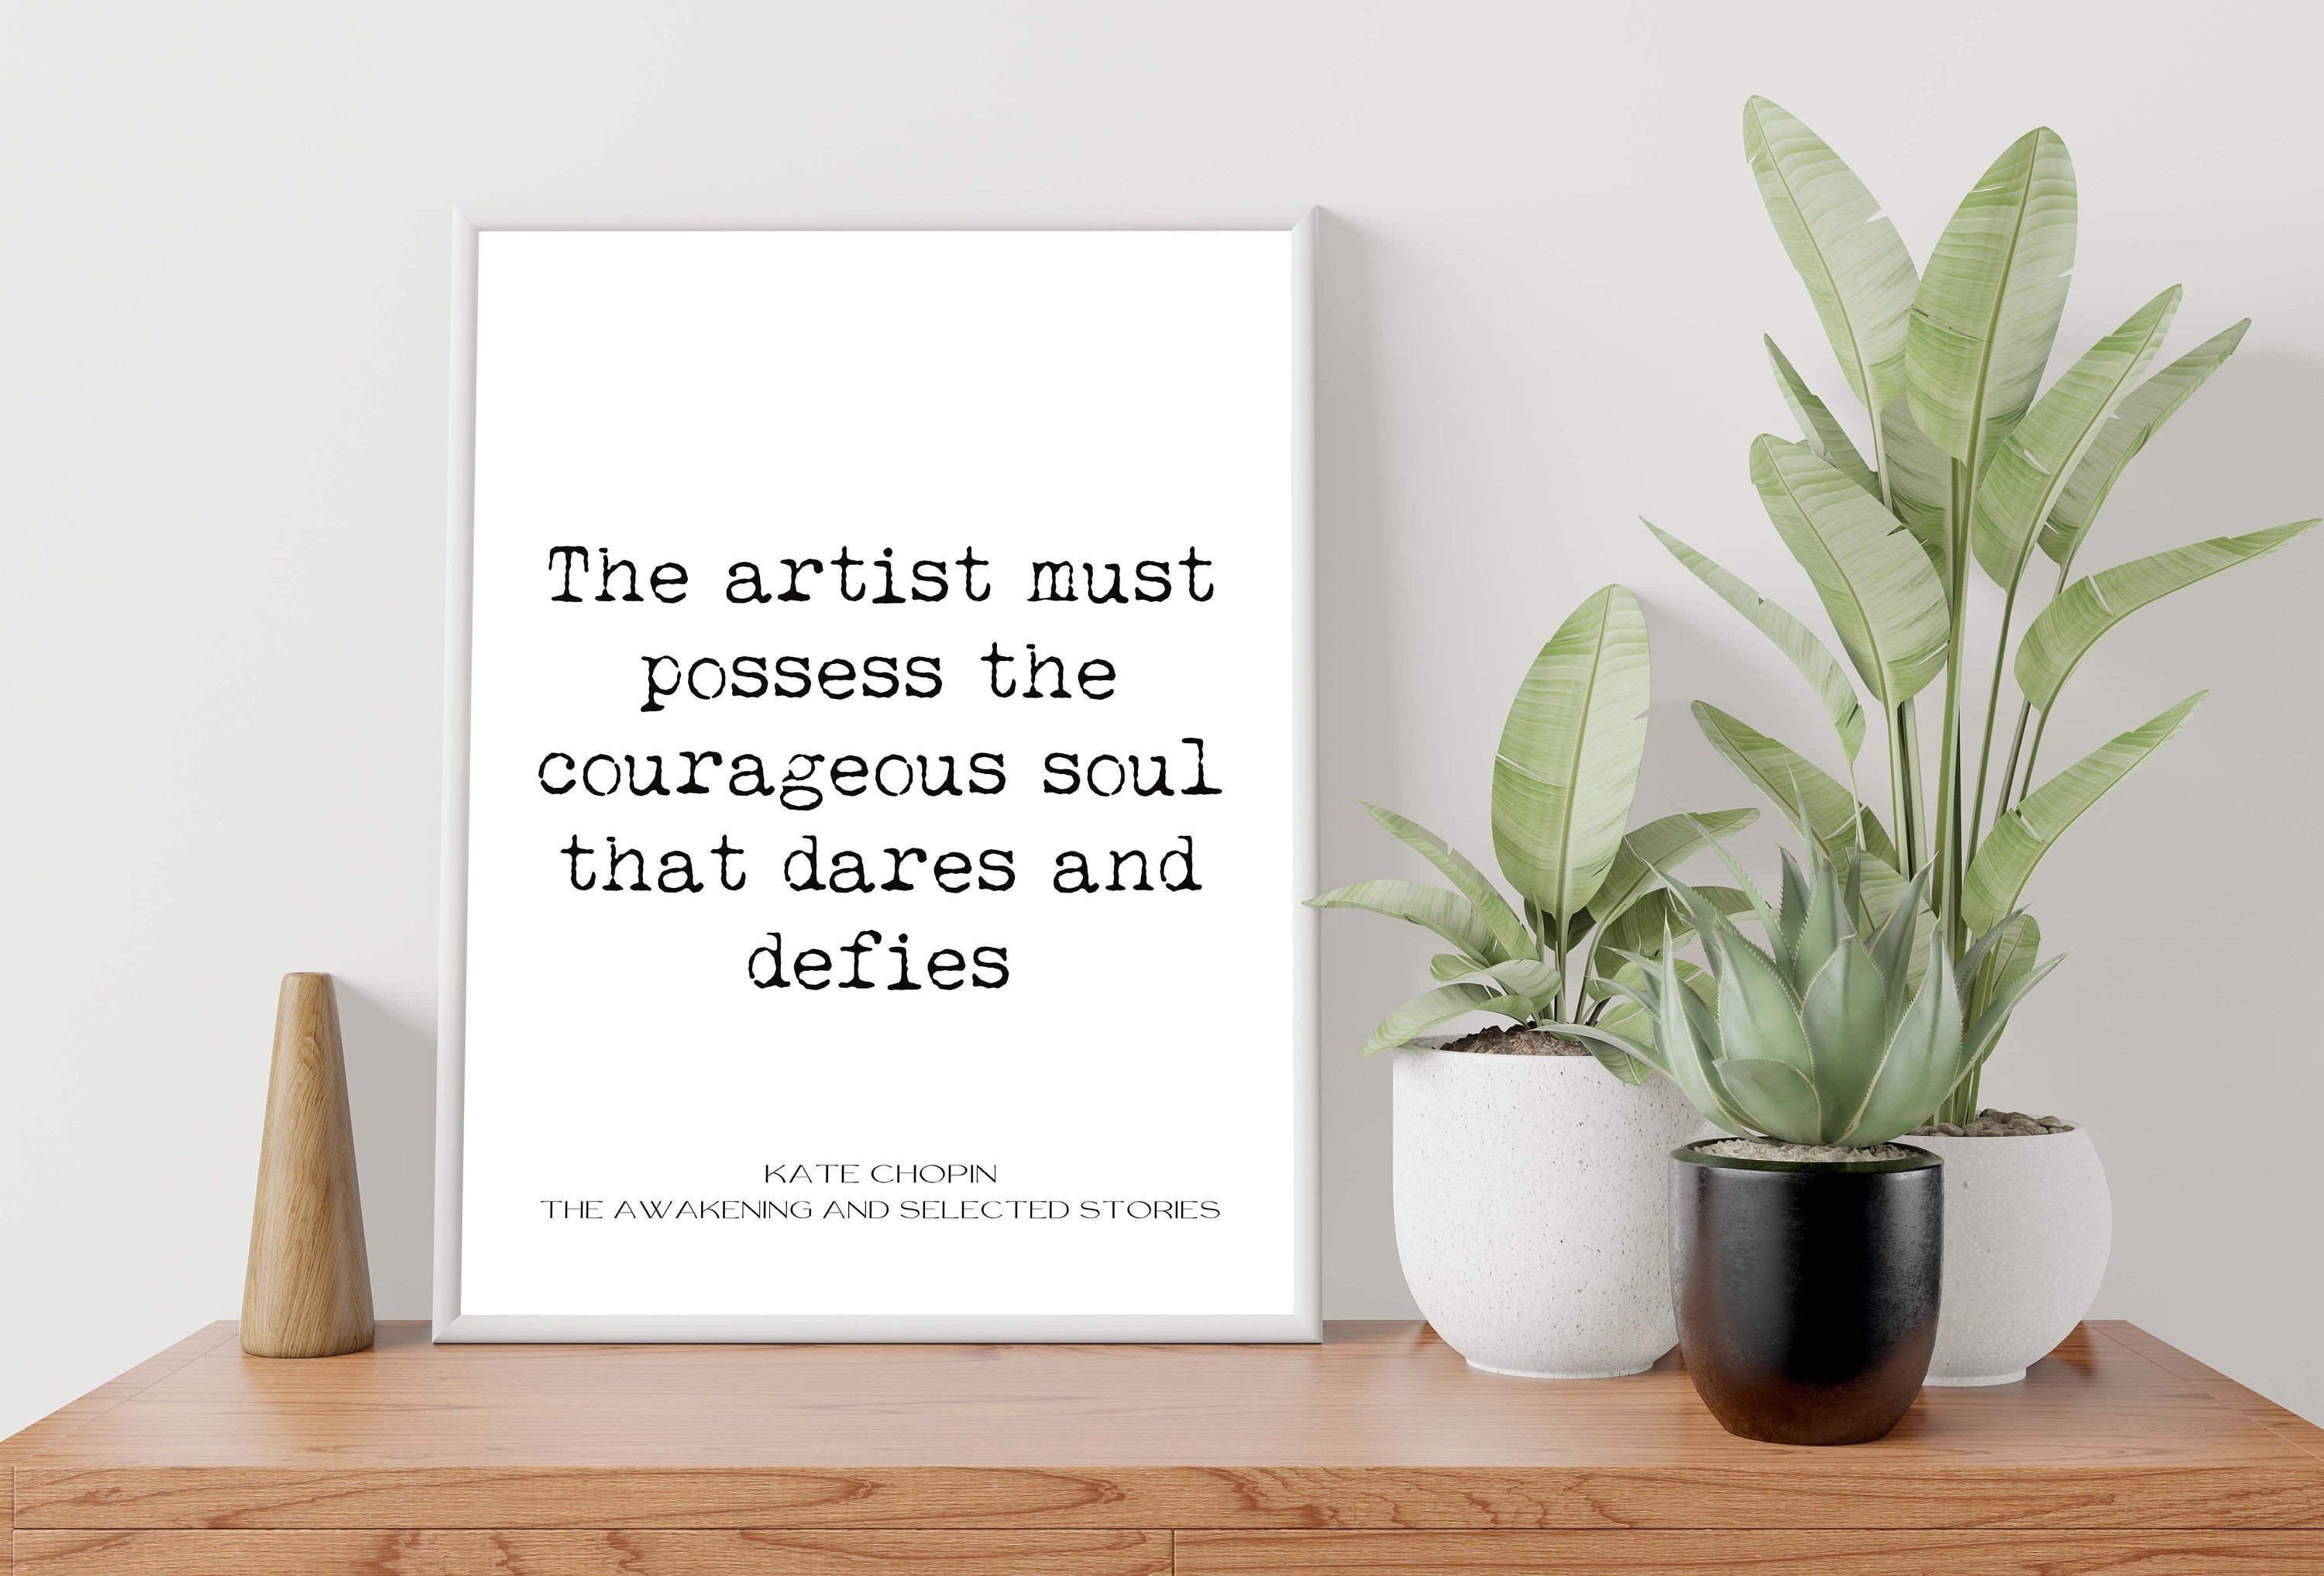 The Awakening Kate Chopin Print, The artist must possess the courageous soul